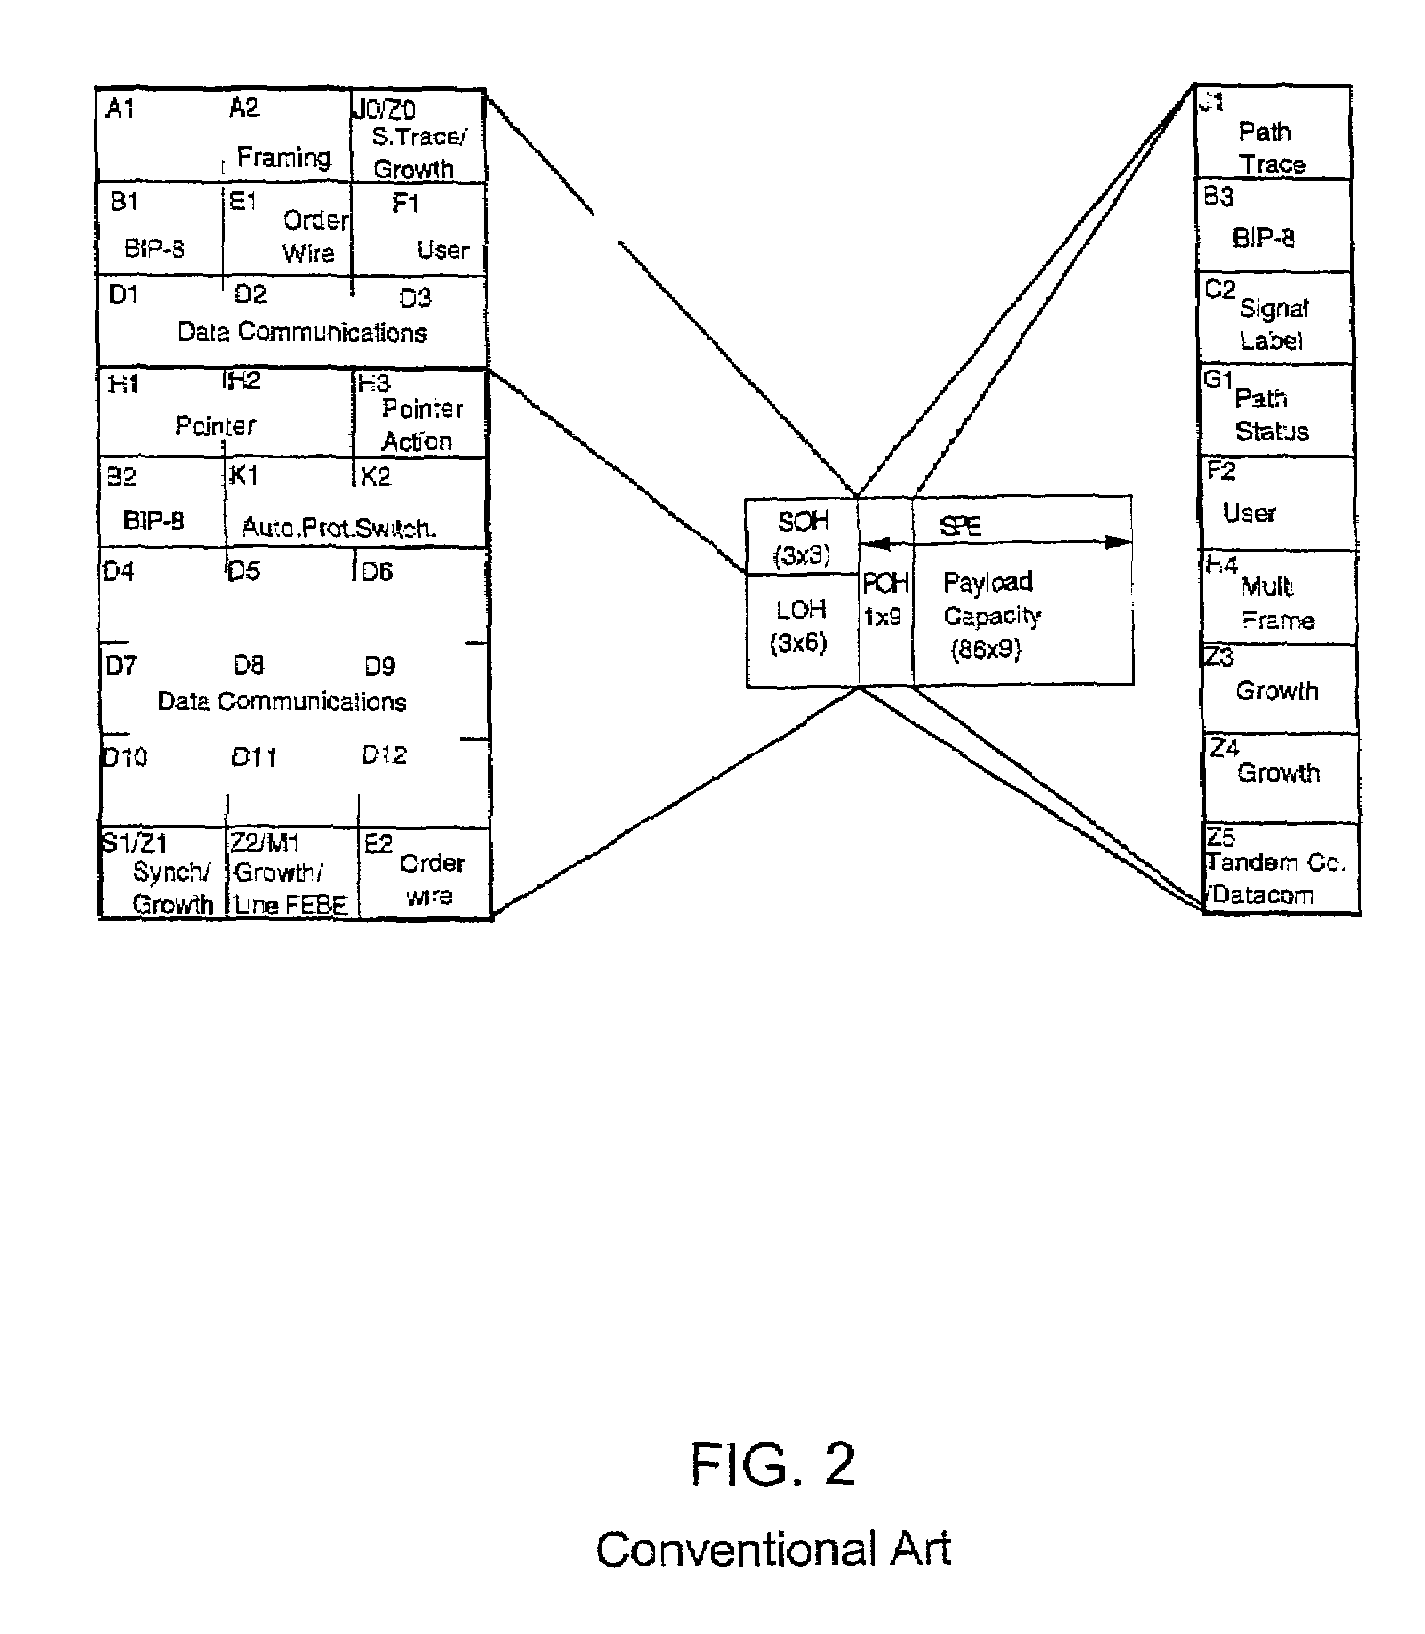 Method and system for detecting network elements in an optical communications network